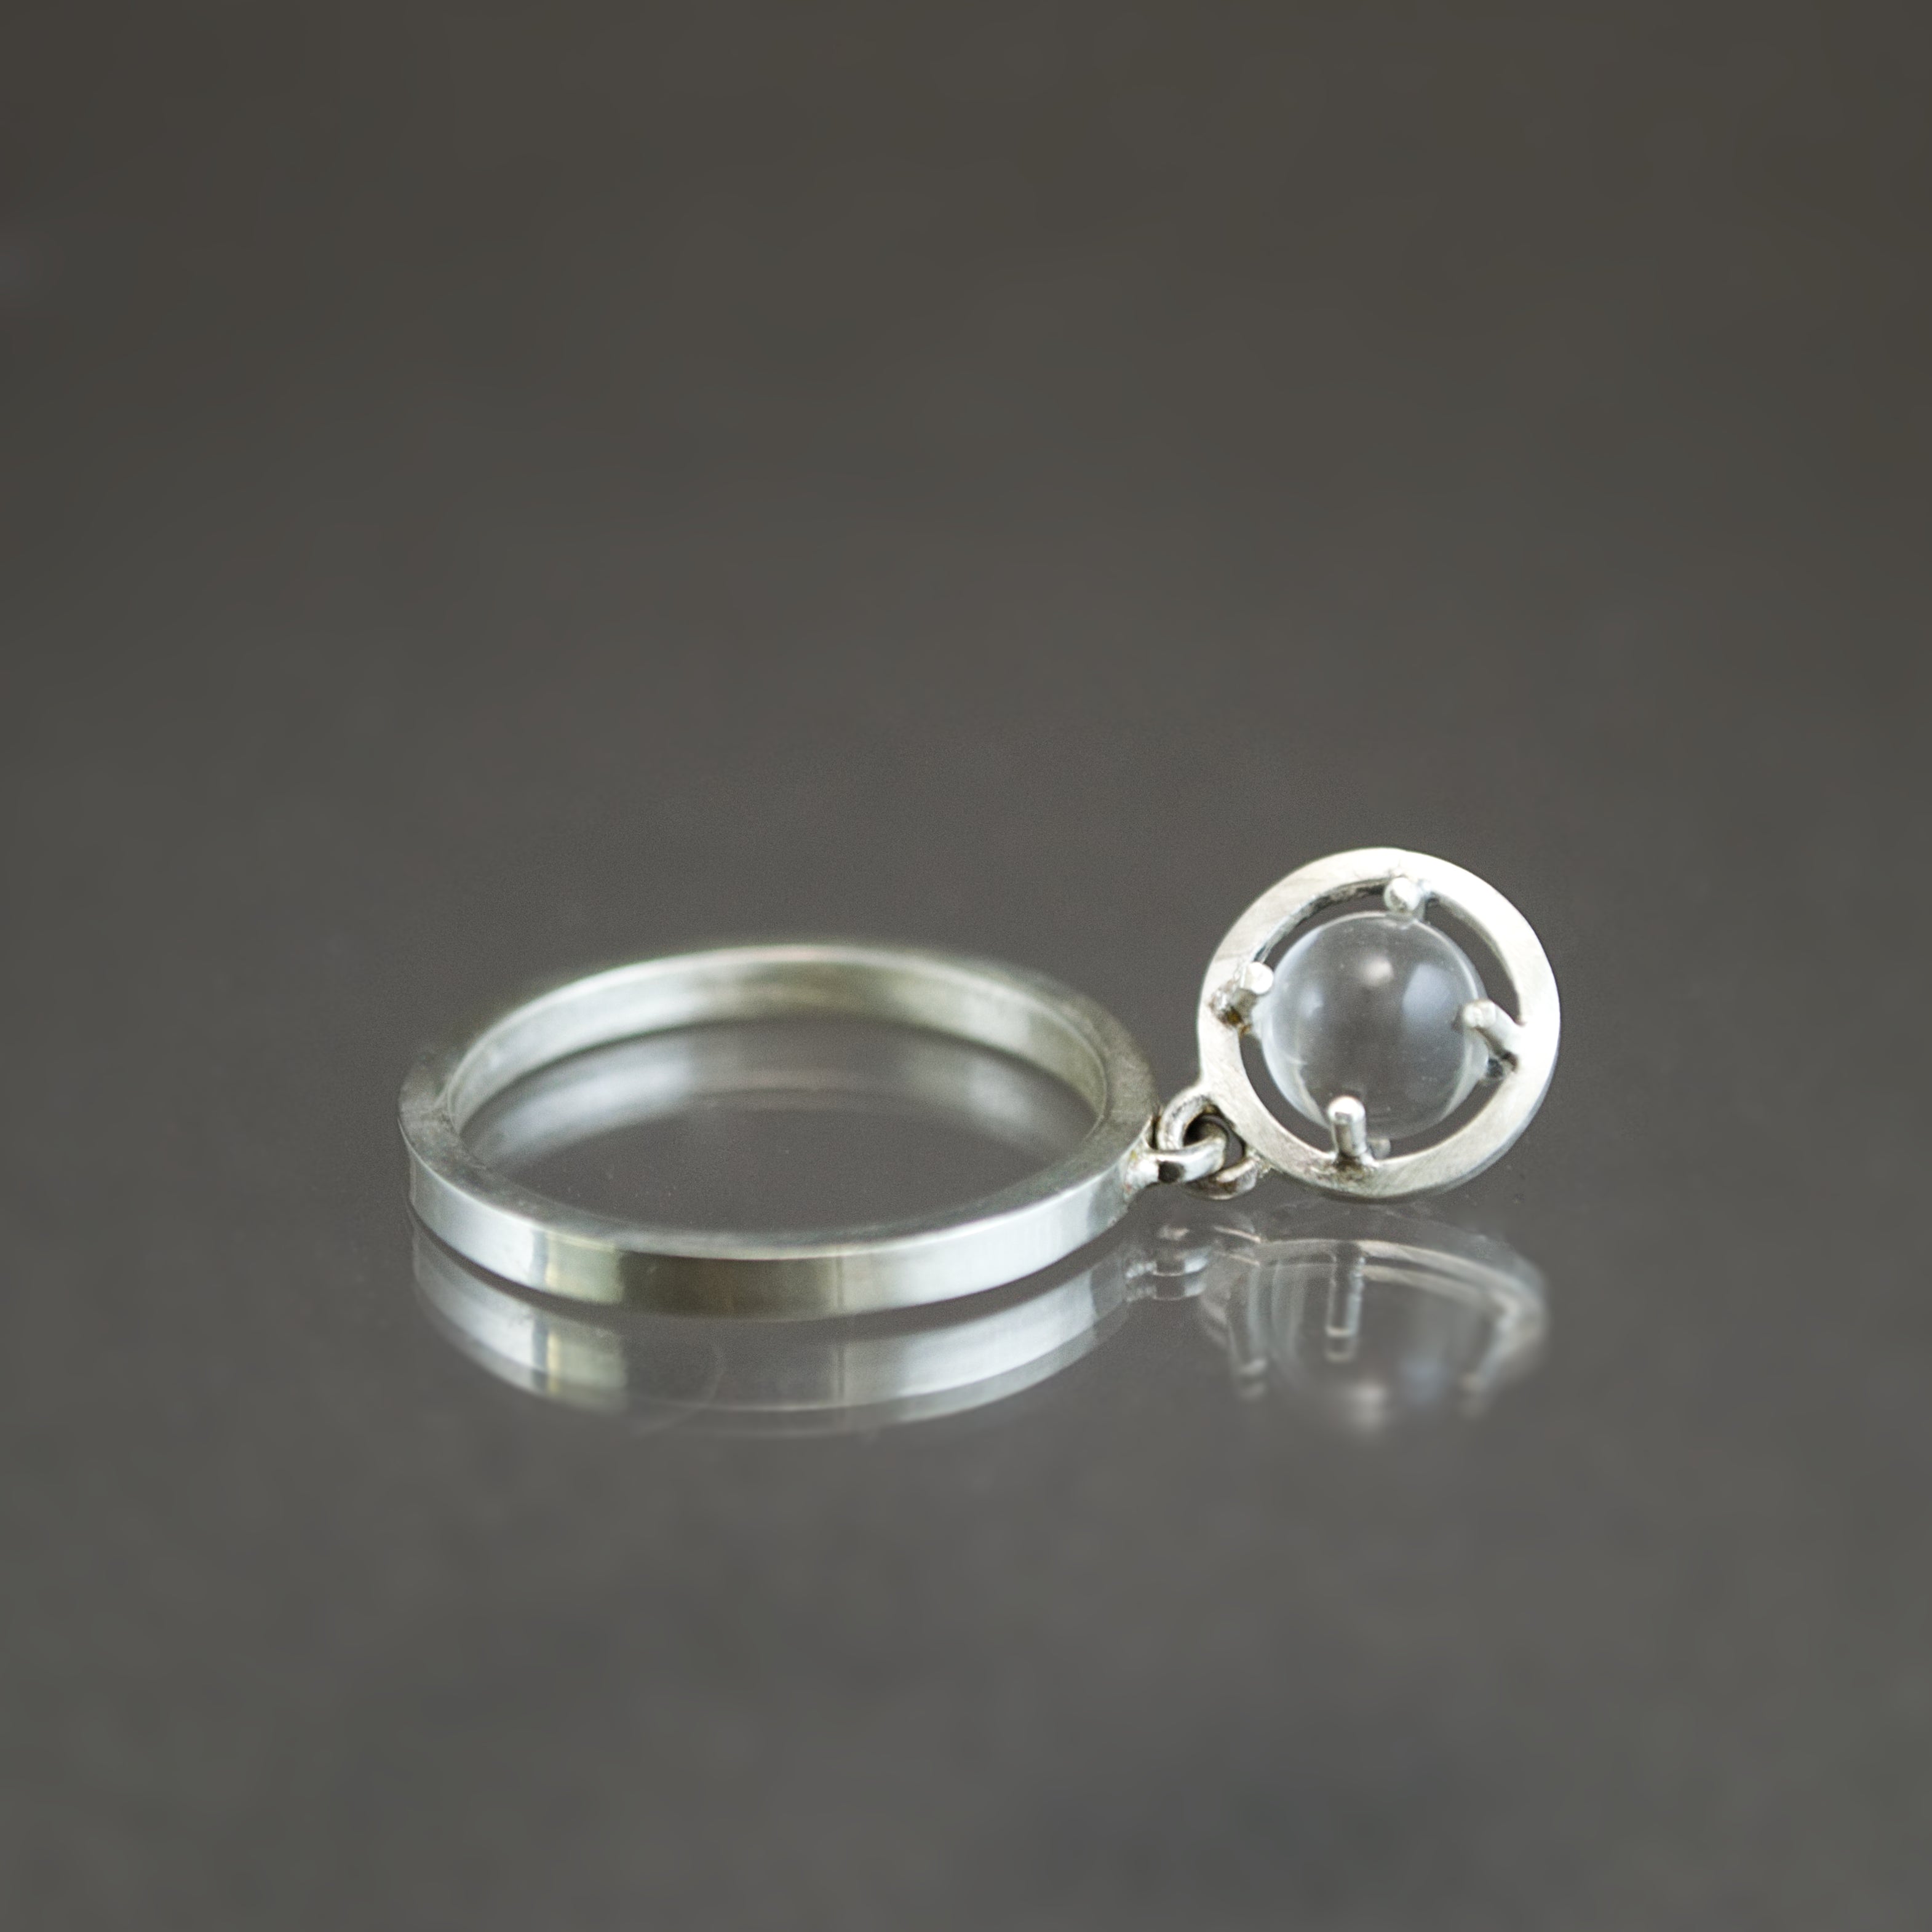 Caged Sphere Kinetic Ring